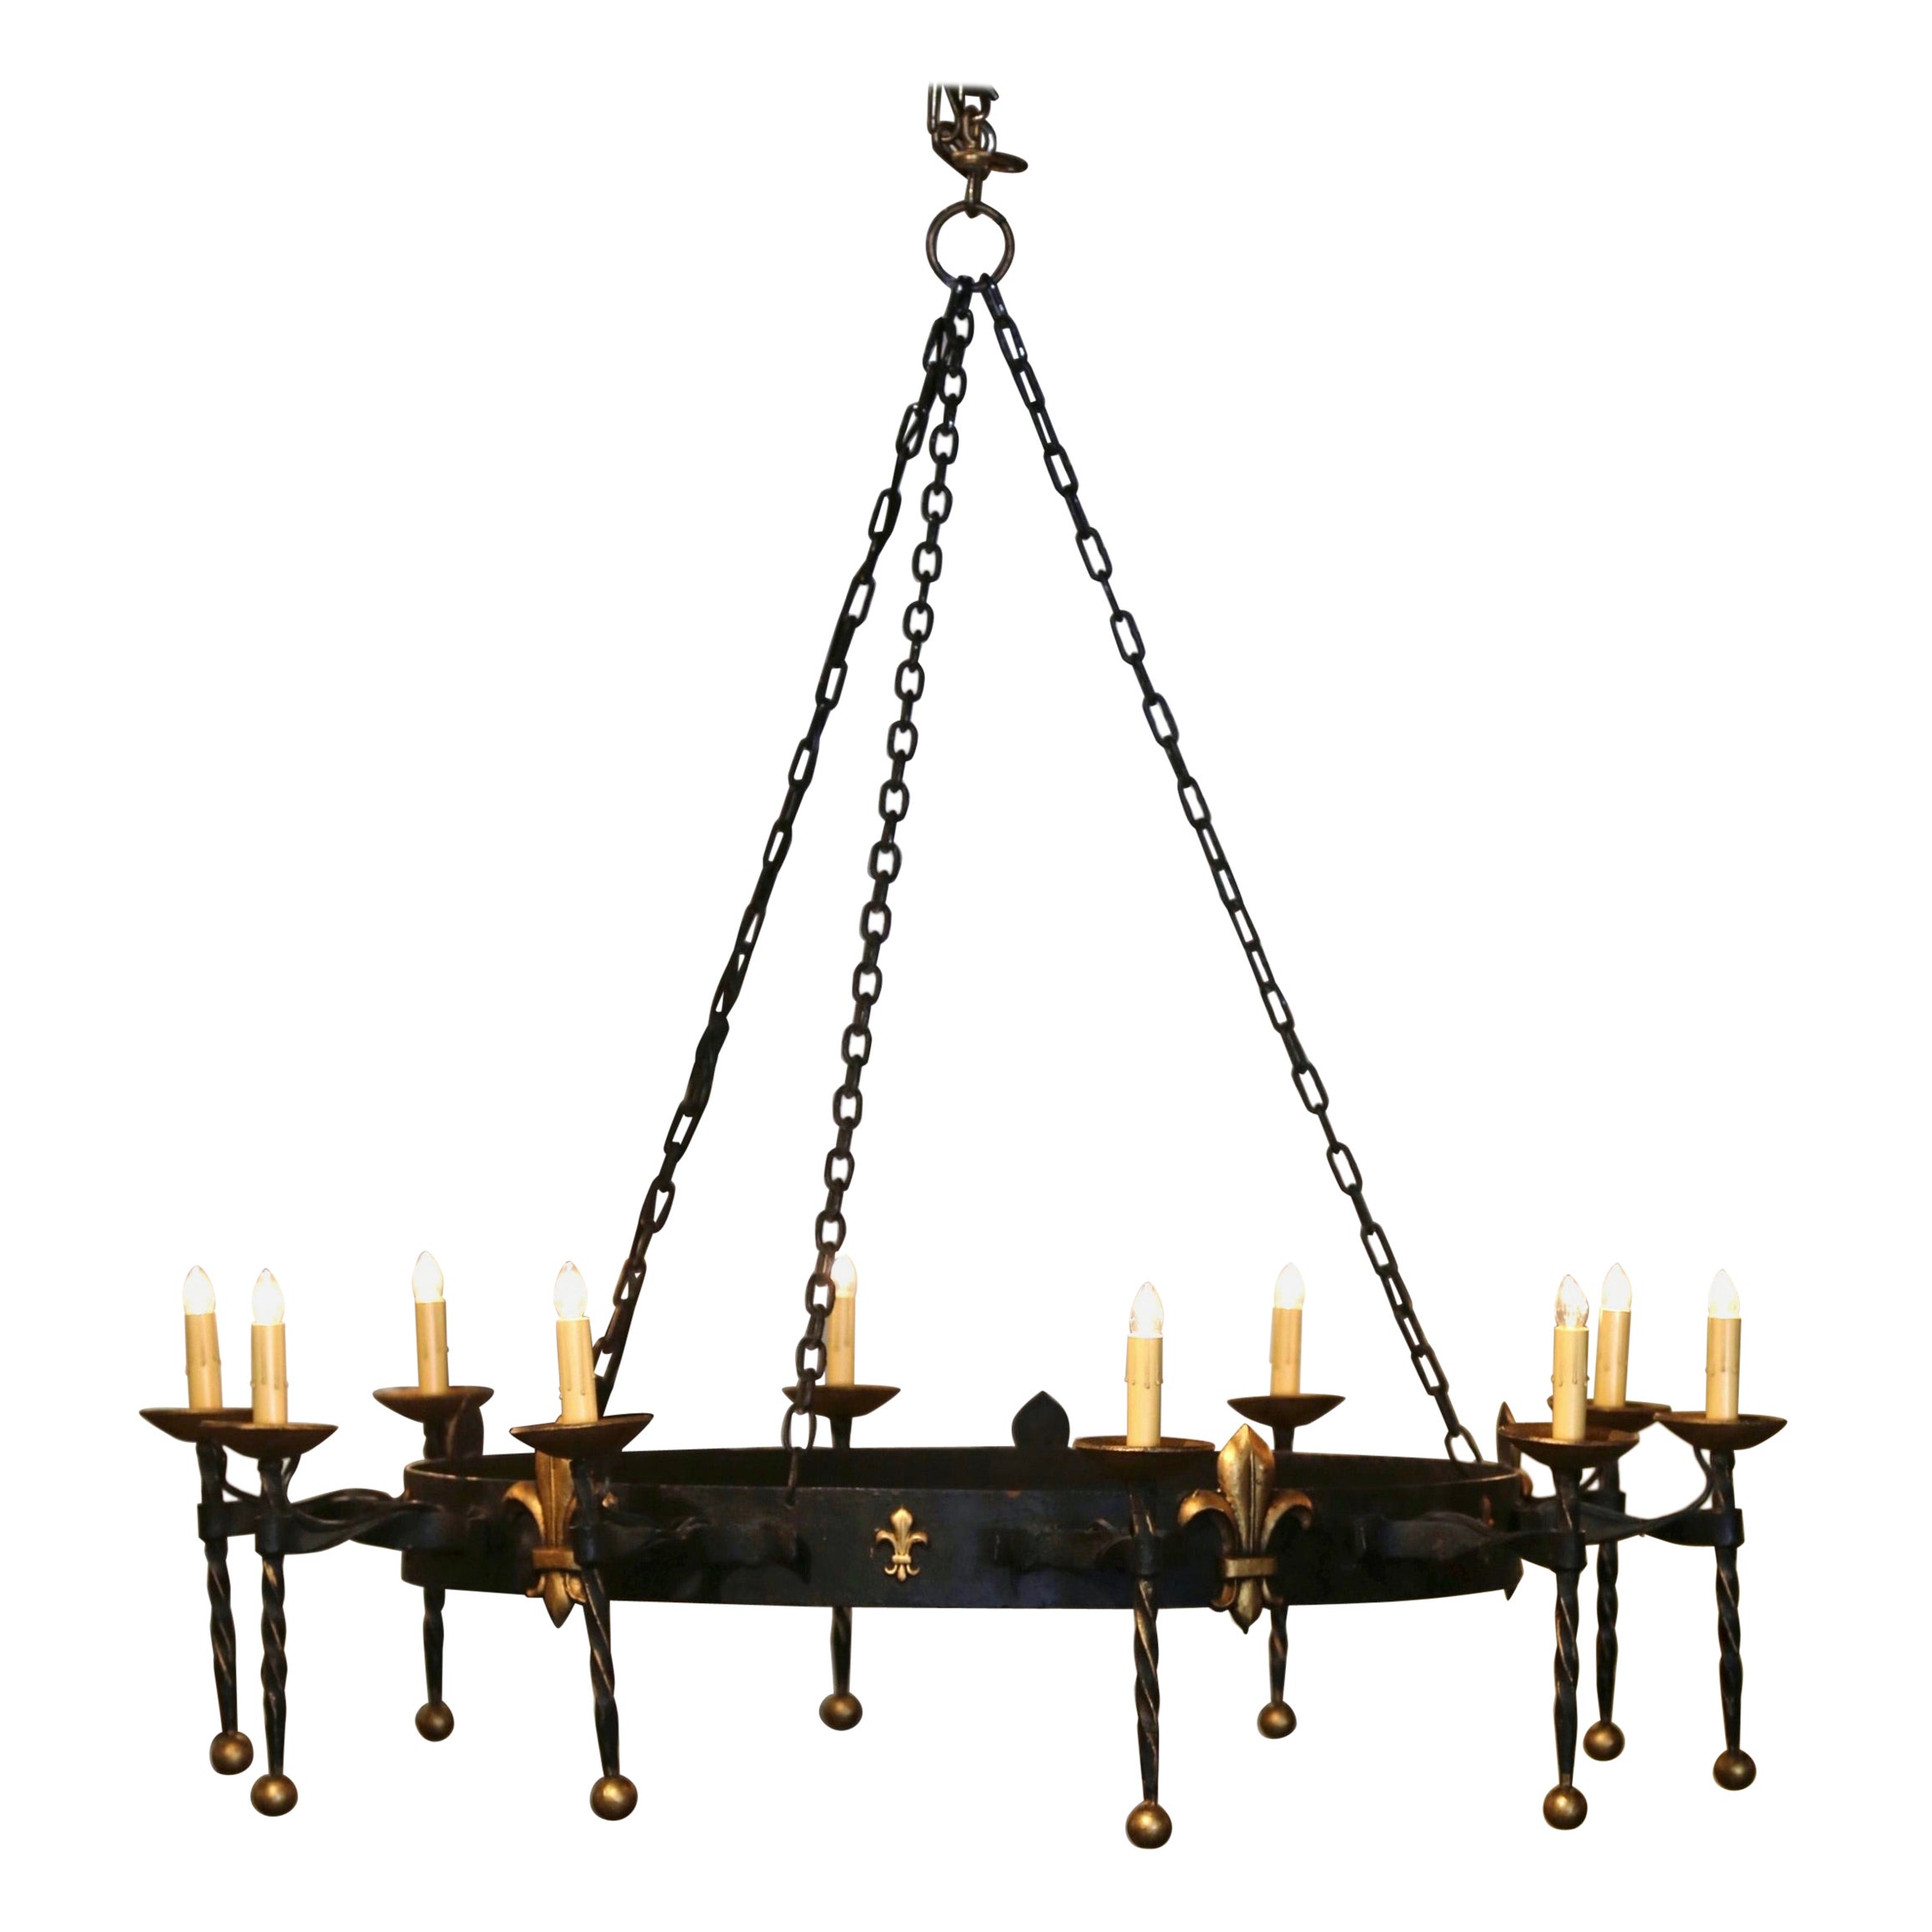 Early 20th Century French Wrought Iron Ten-Light Chandelier with Fleurs-de-Lys